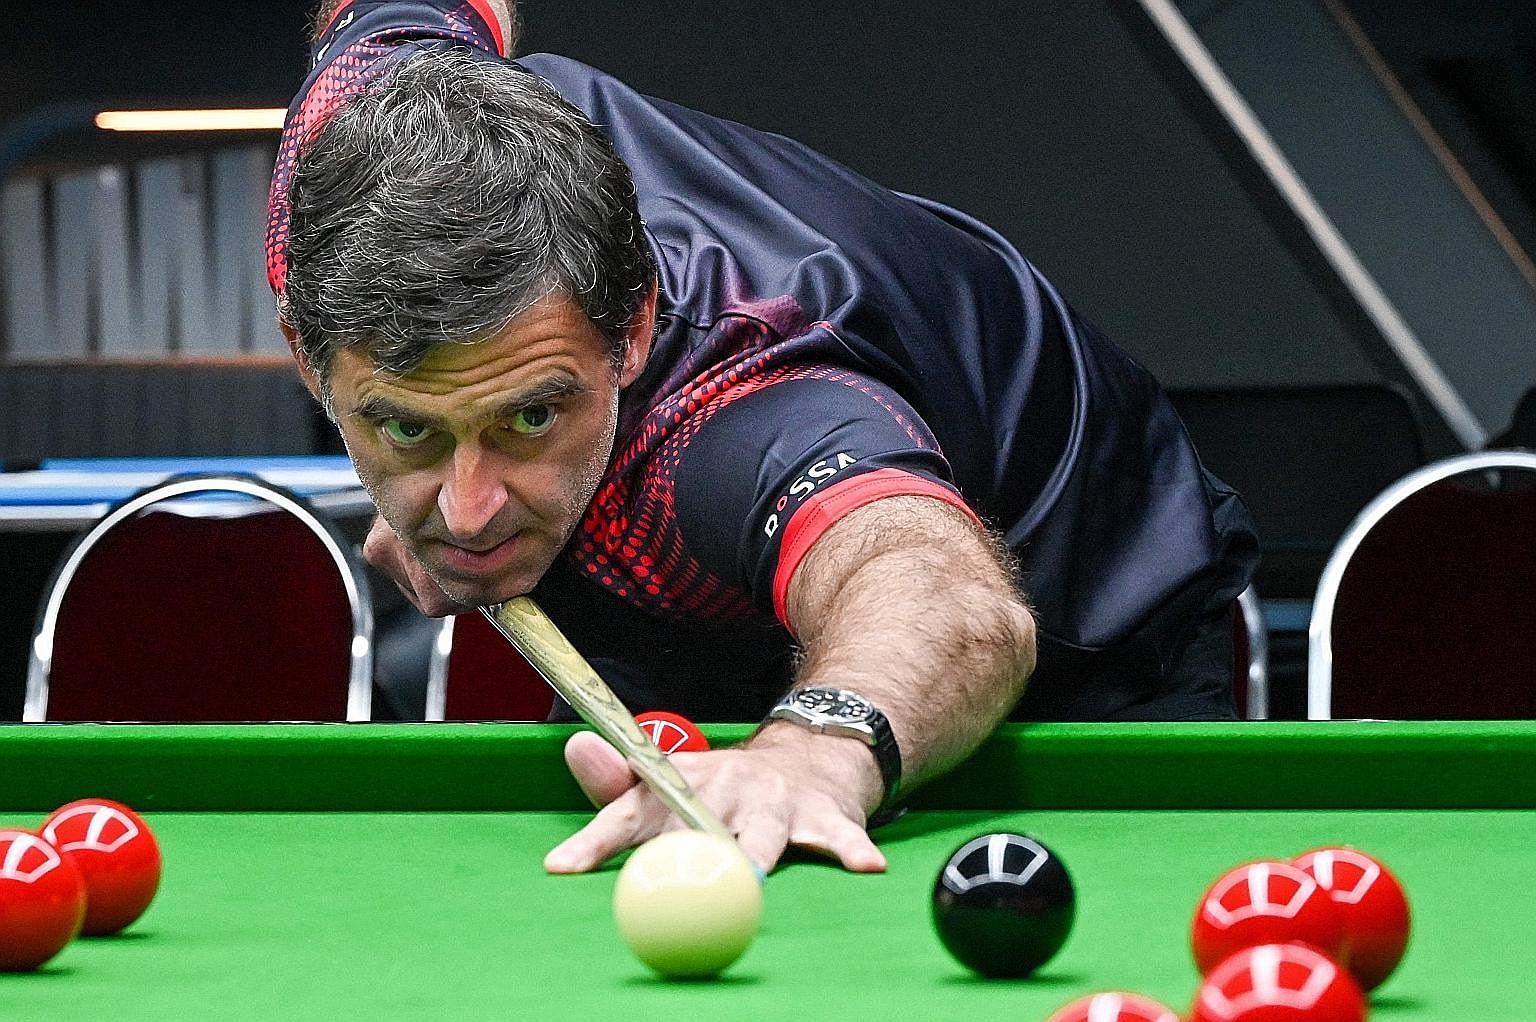 World champ spreads love of snooker, Sports News